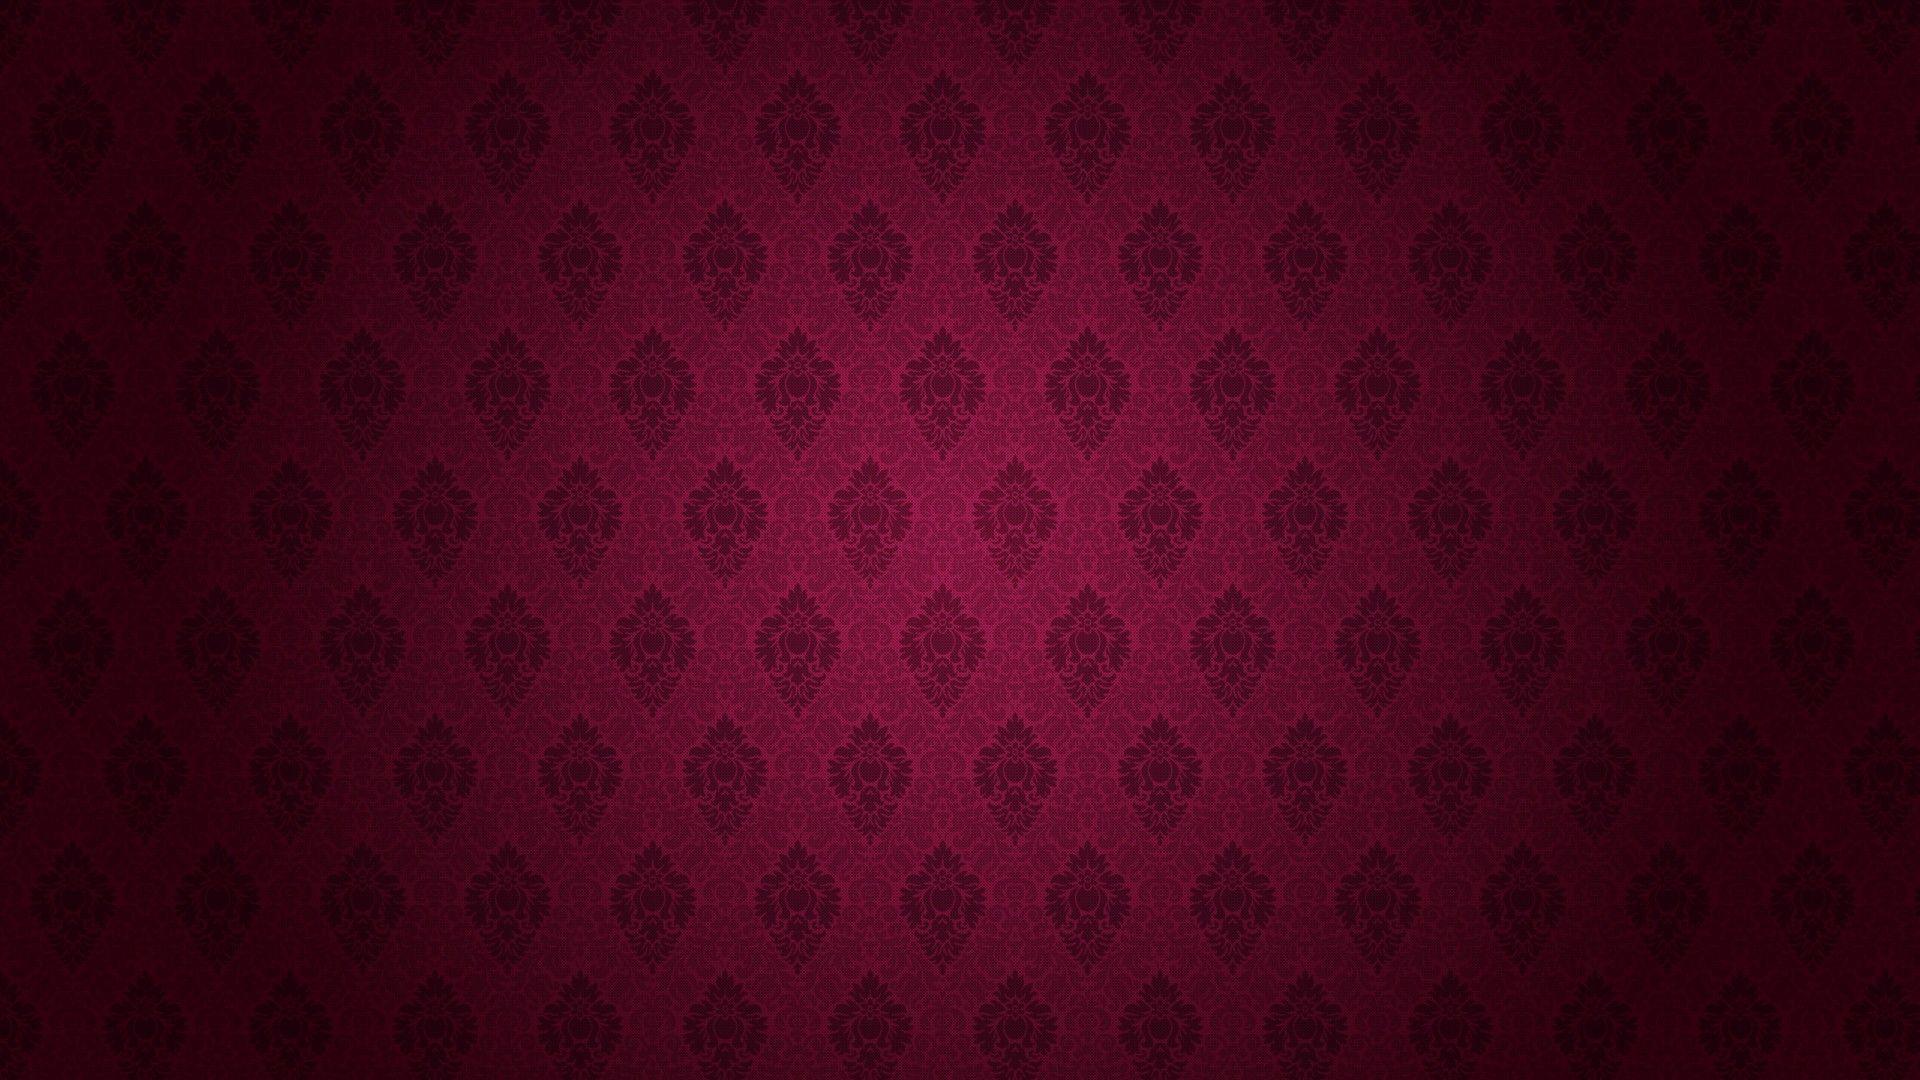 Royal iPhone Wallpaper Free Royal iPhone Background